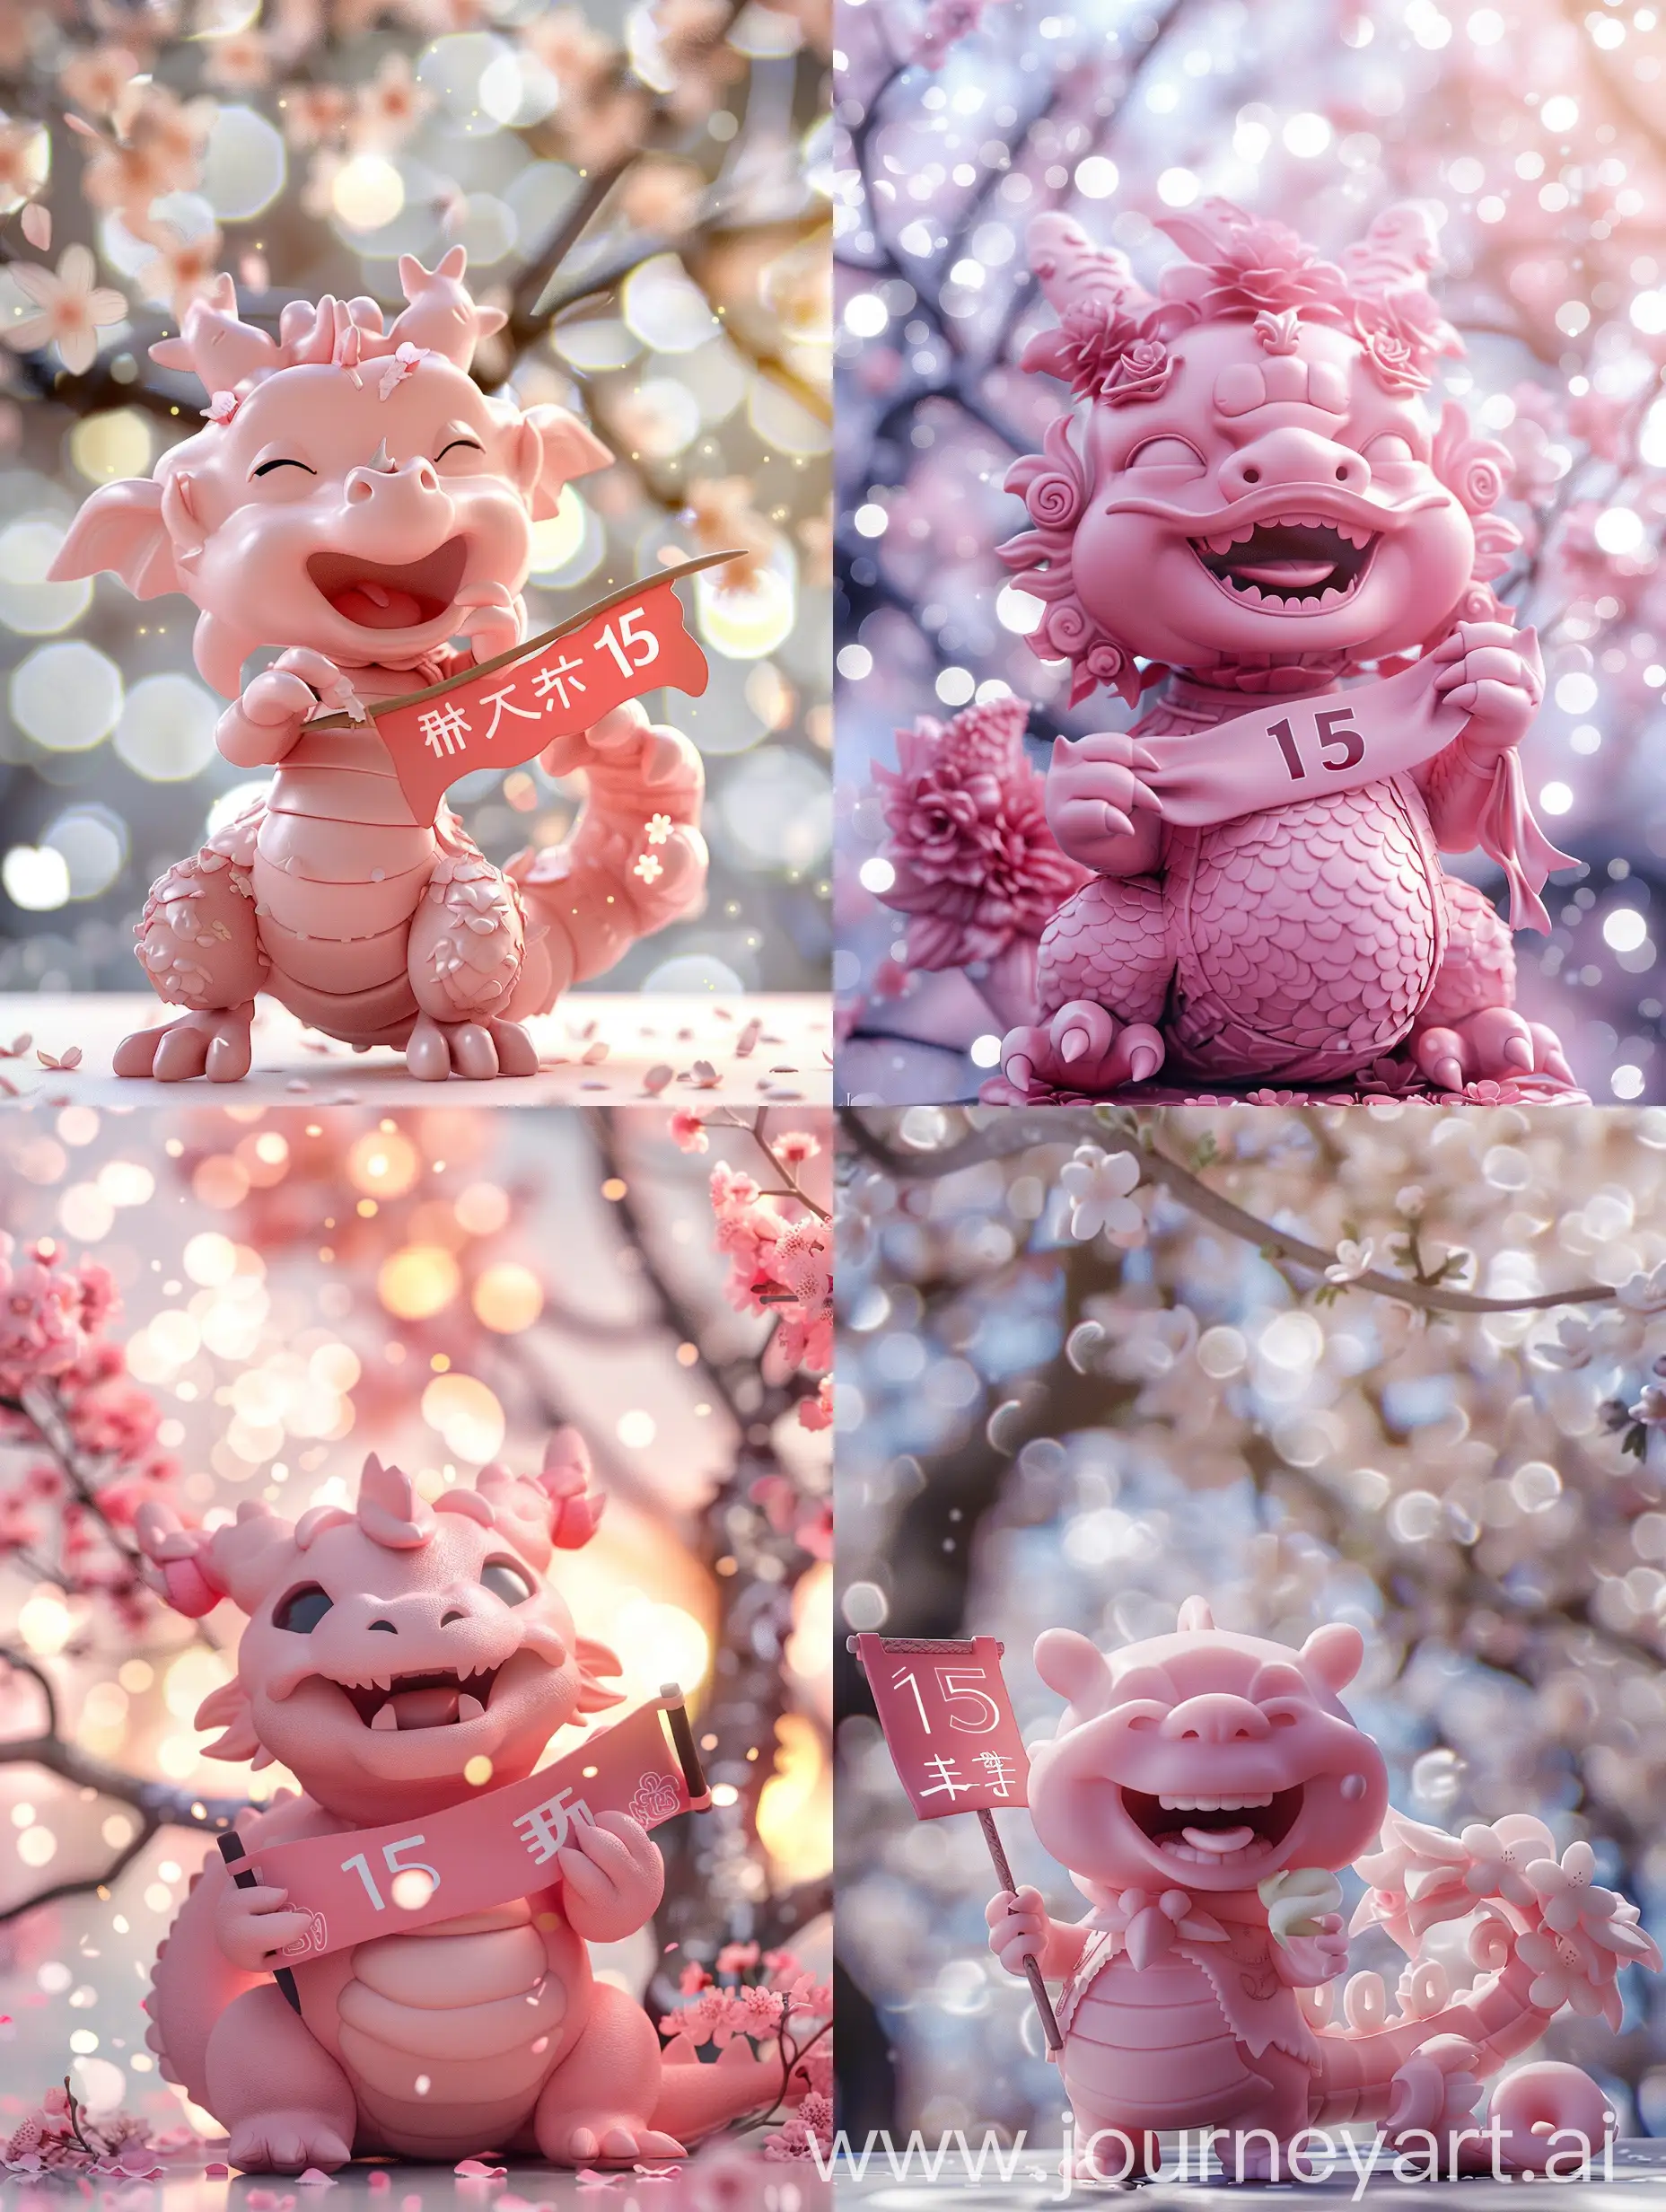 Adorable-Smiling-Chinese-Kid-Dragon-Holding-15-Banner-amidst-Spring-Blossoms